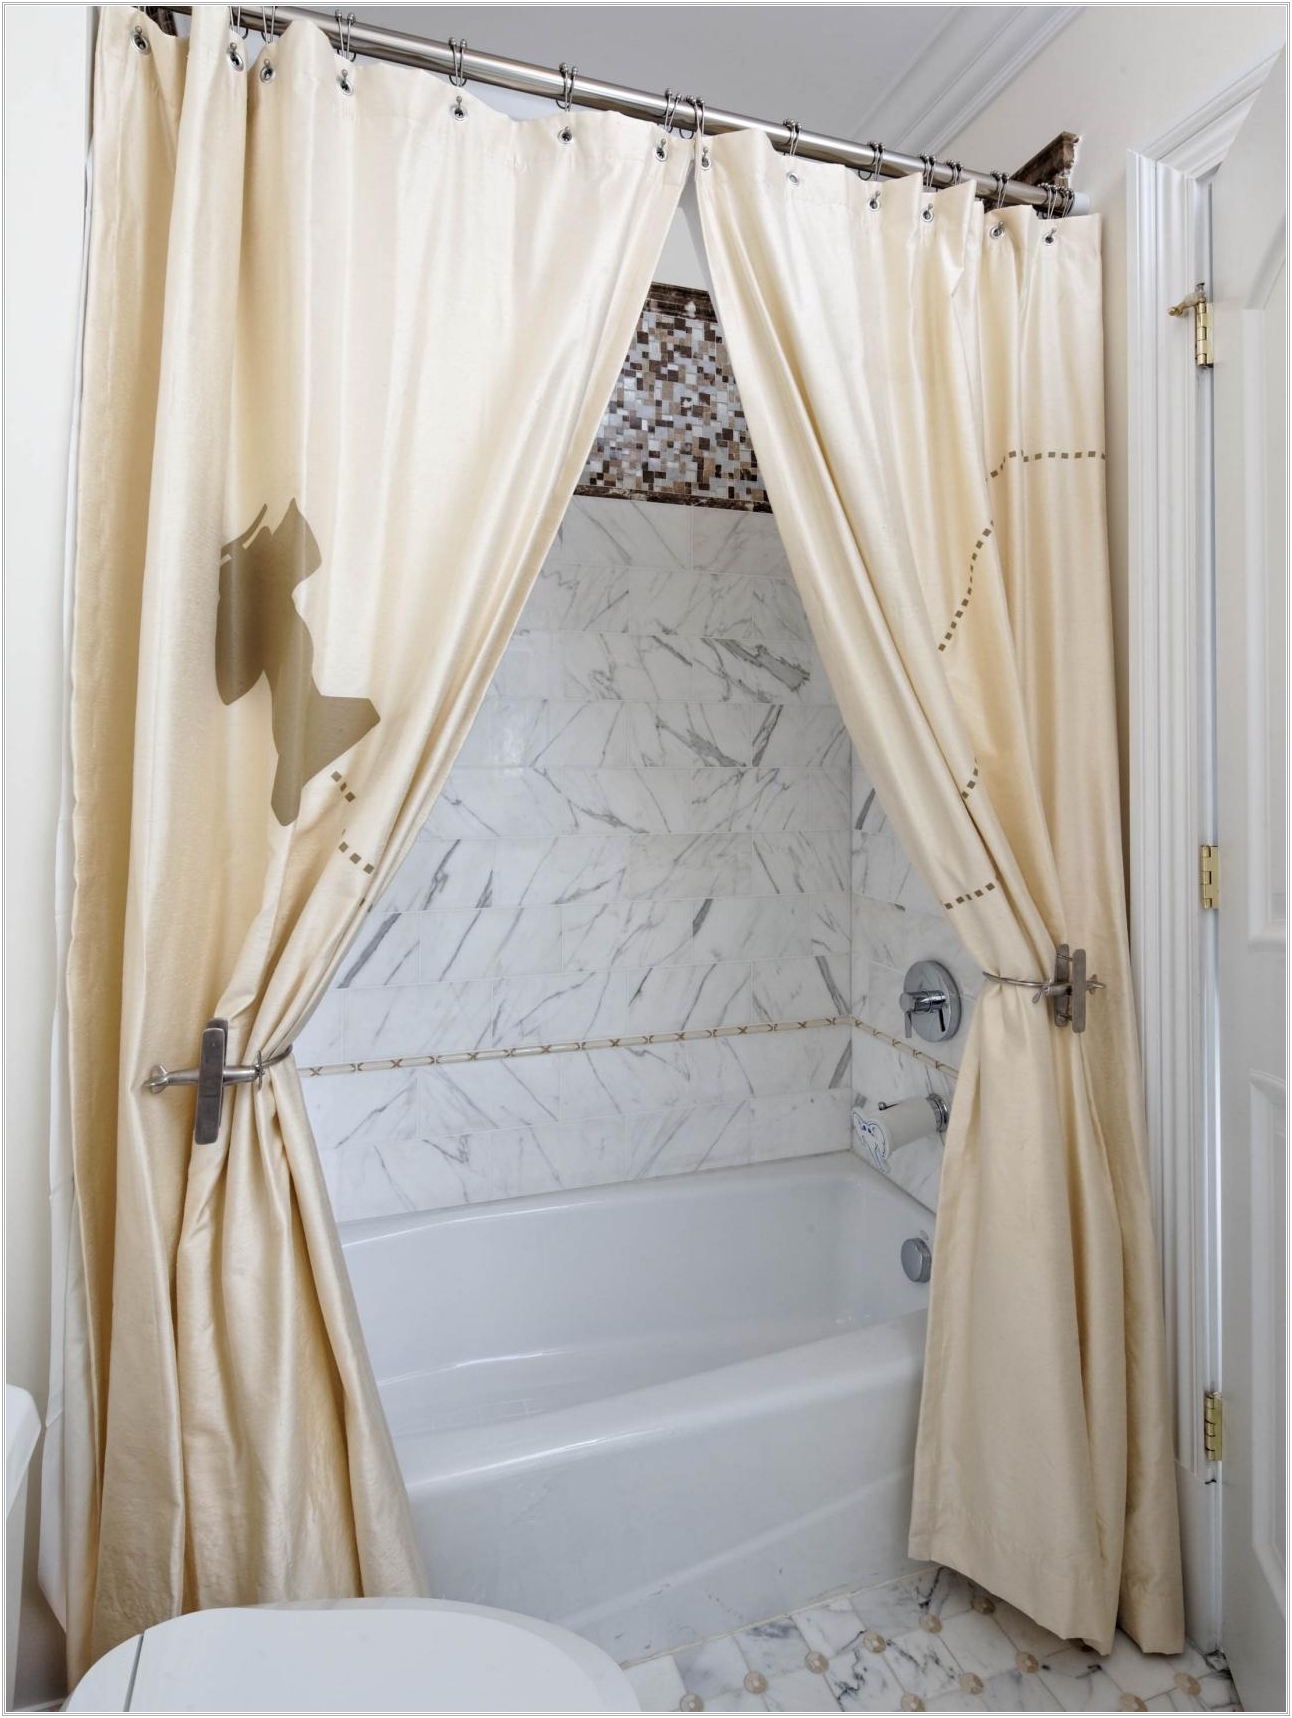 Using two shower curtains and a pair of whimsical drapery